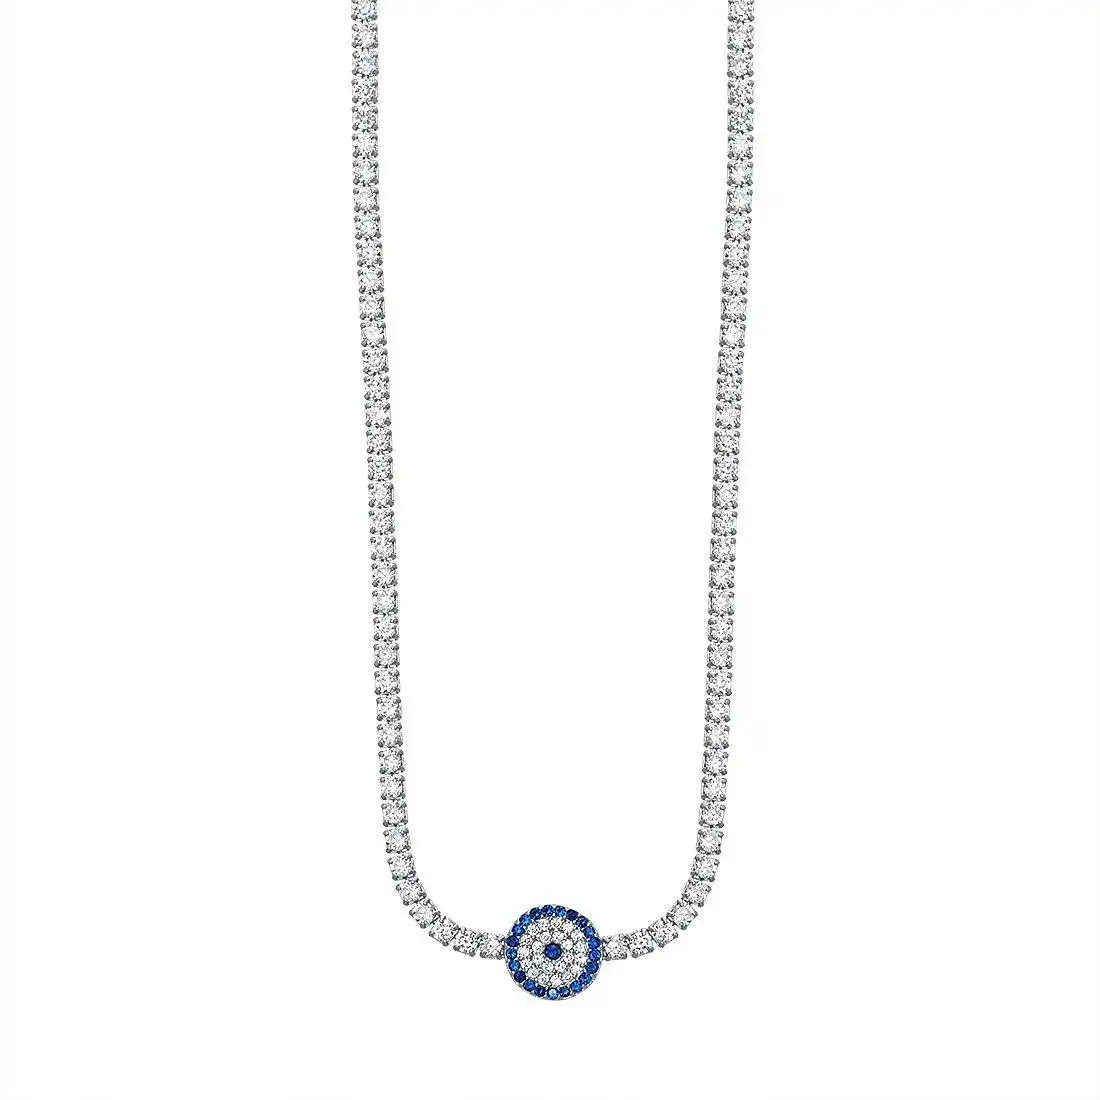 35cm Evil Eye Tennis Necklace with Cubic Zirconia in Sterling Silver